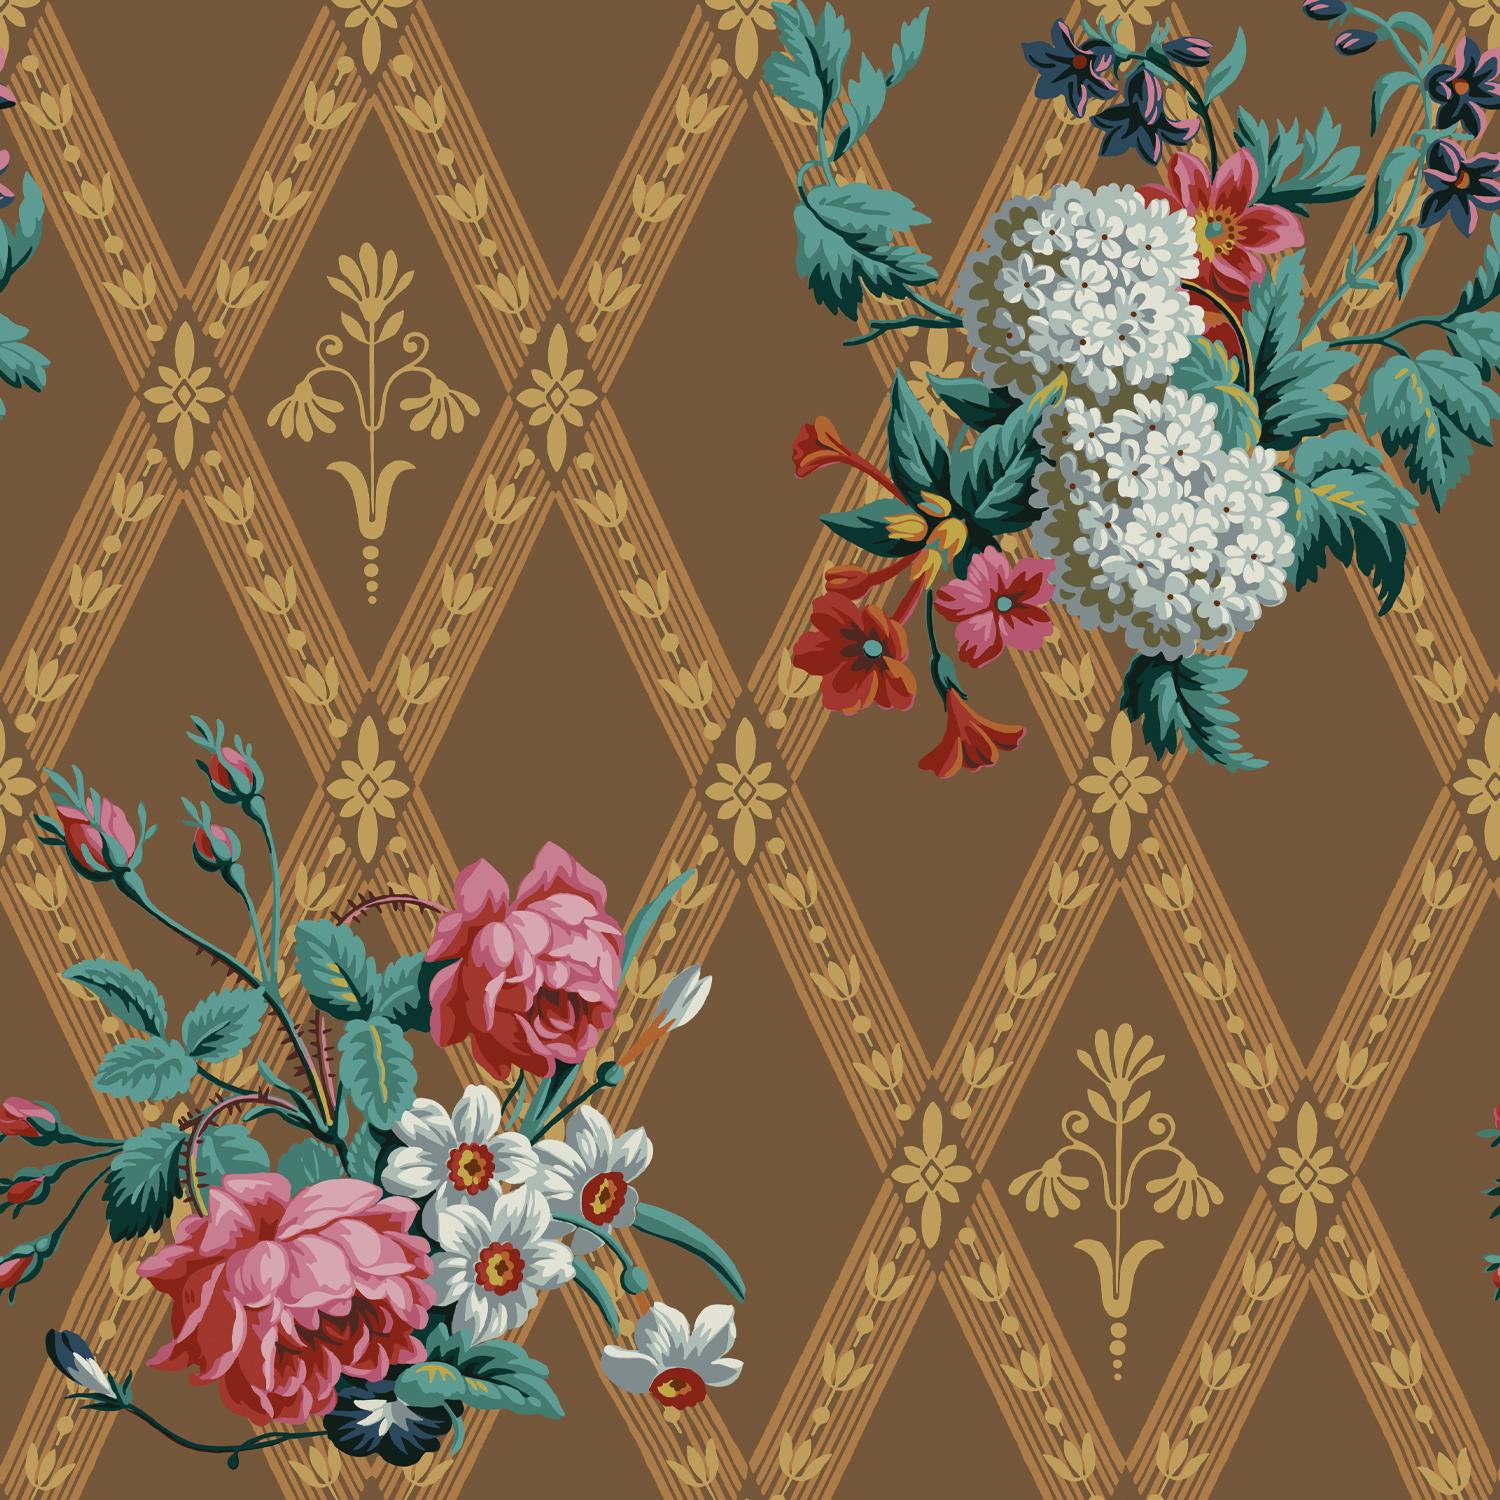 Repeat: 73,6 cm / 29 in

Founded in 2019, the French wallpaper brand Papier Francais is defined by the rediscovery, restoration, and revival of iconic wallpapers dating back to the French “Golden Age of wallpaper” of the 18th and 19th centuries.